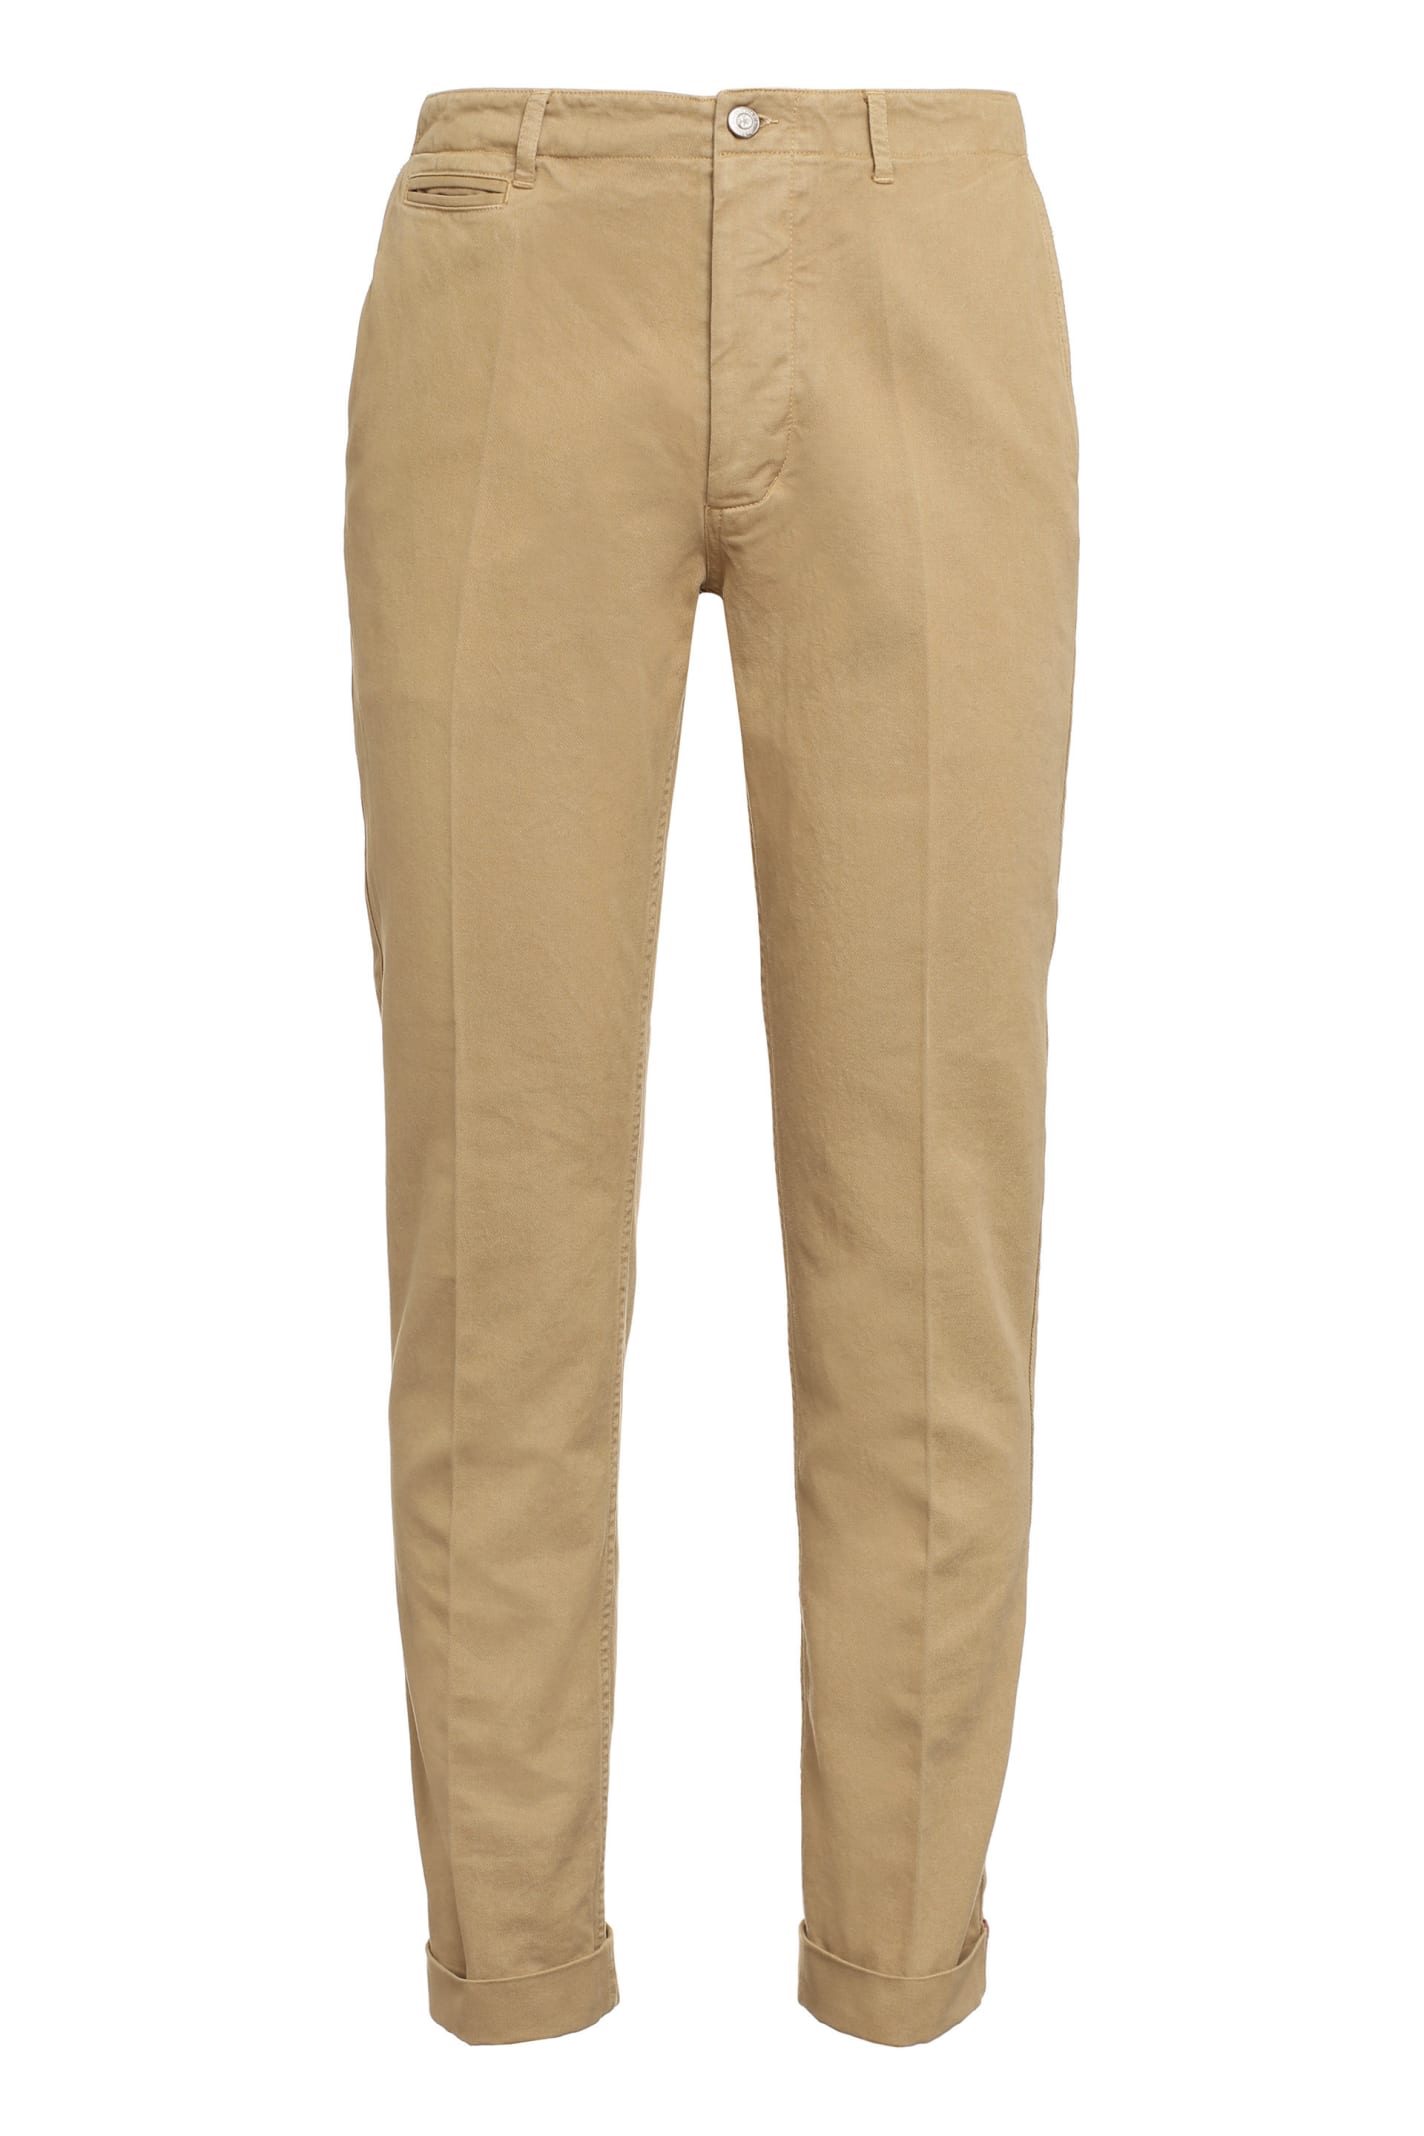 Golden Goose Cotton Twill Chino Trousers